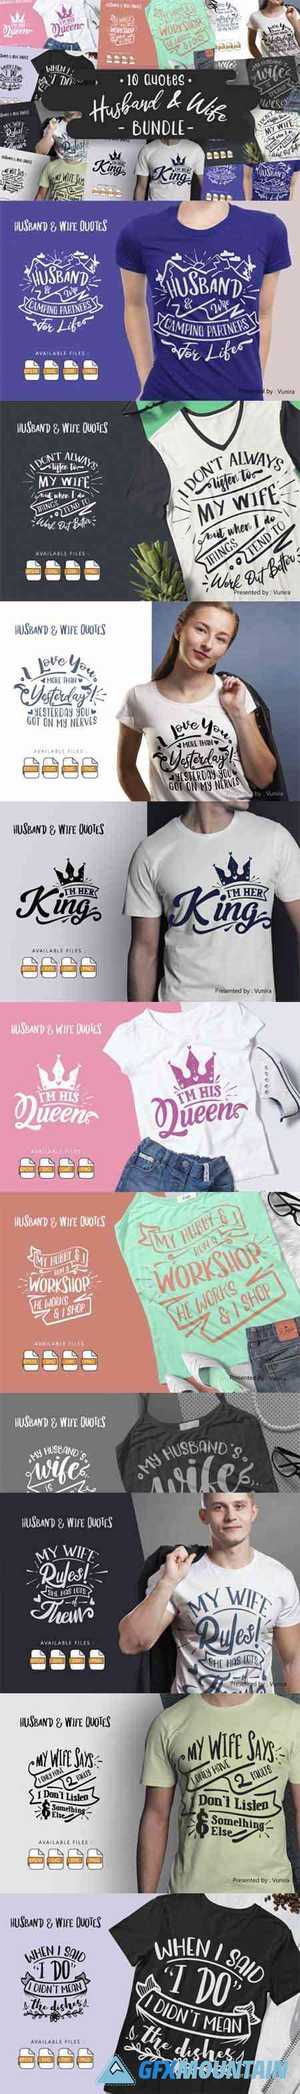 10 Husband & Wife | Lettering Quotes 6267485